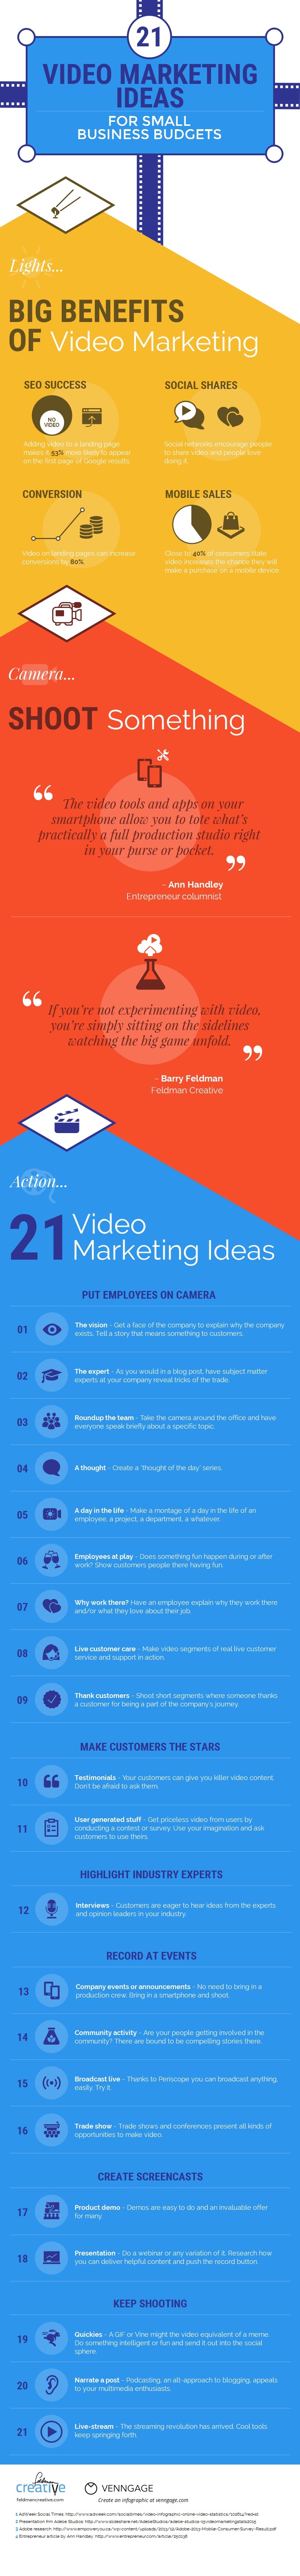 160423-21-video-marketing-ideas-for-small-budgets-infographic